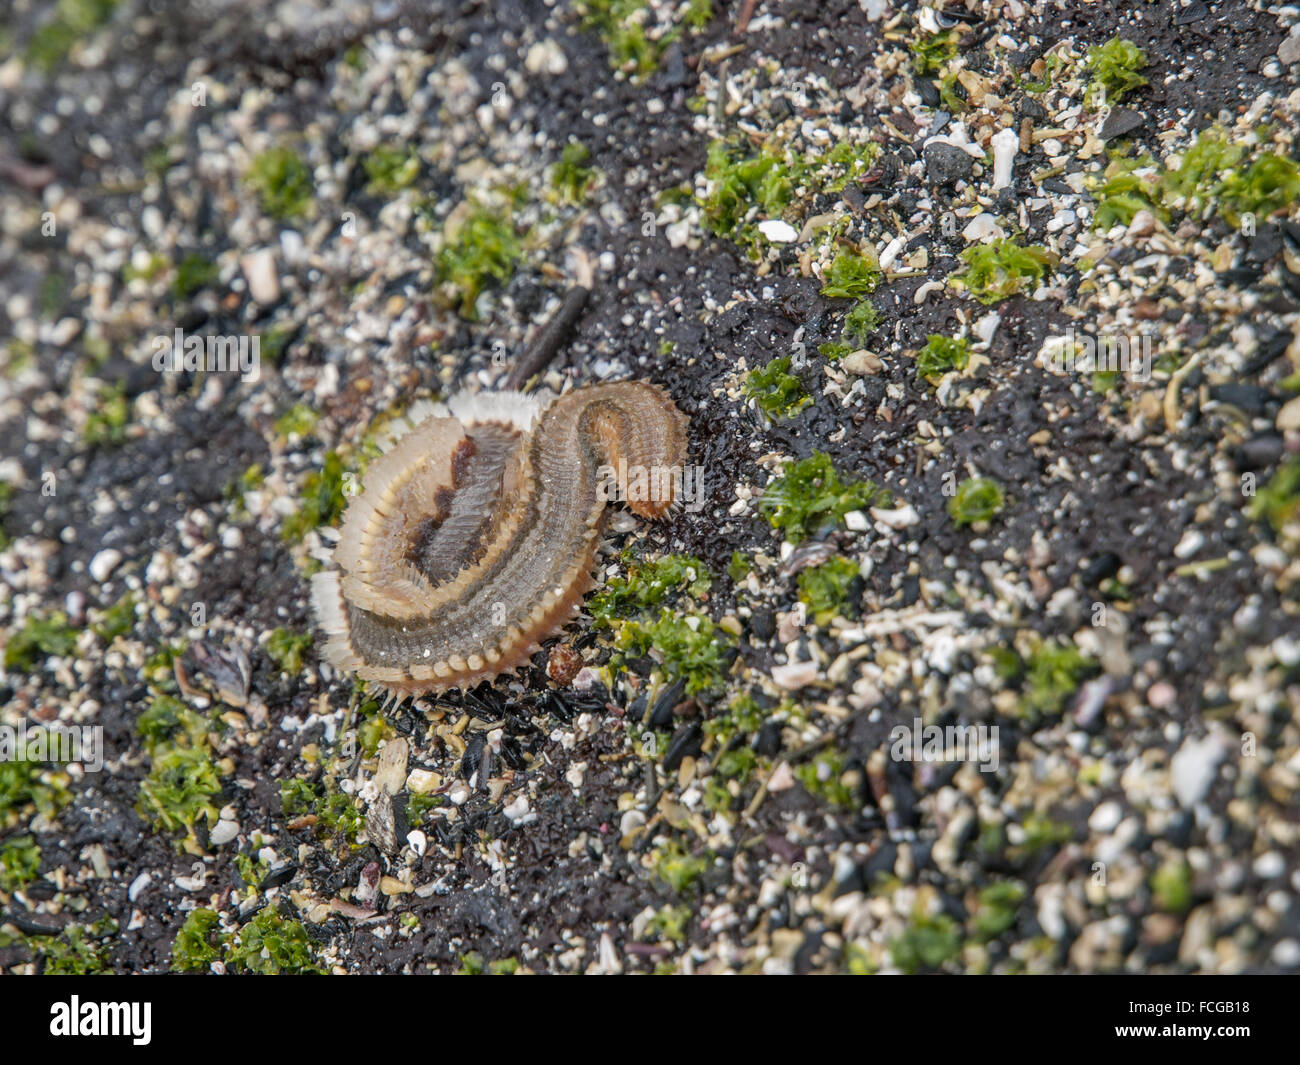 Curled up fireworm on black lava rock and green moss in Galapagos Islands, Ecuador. Stock Photo